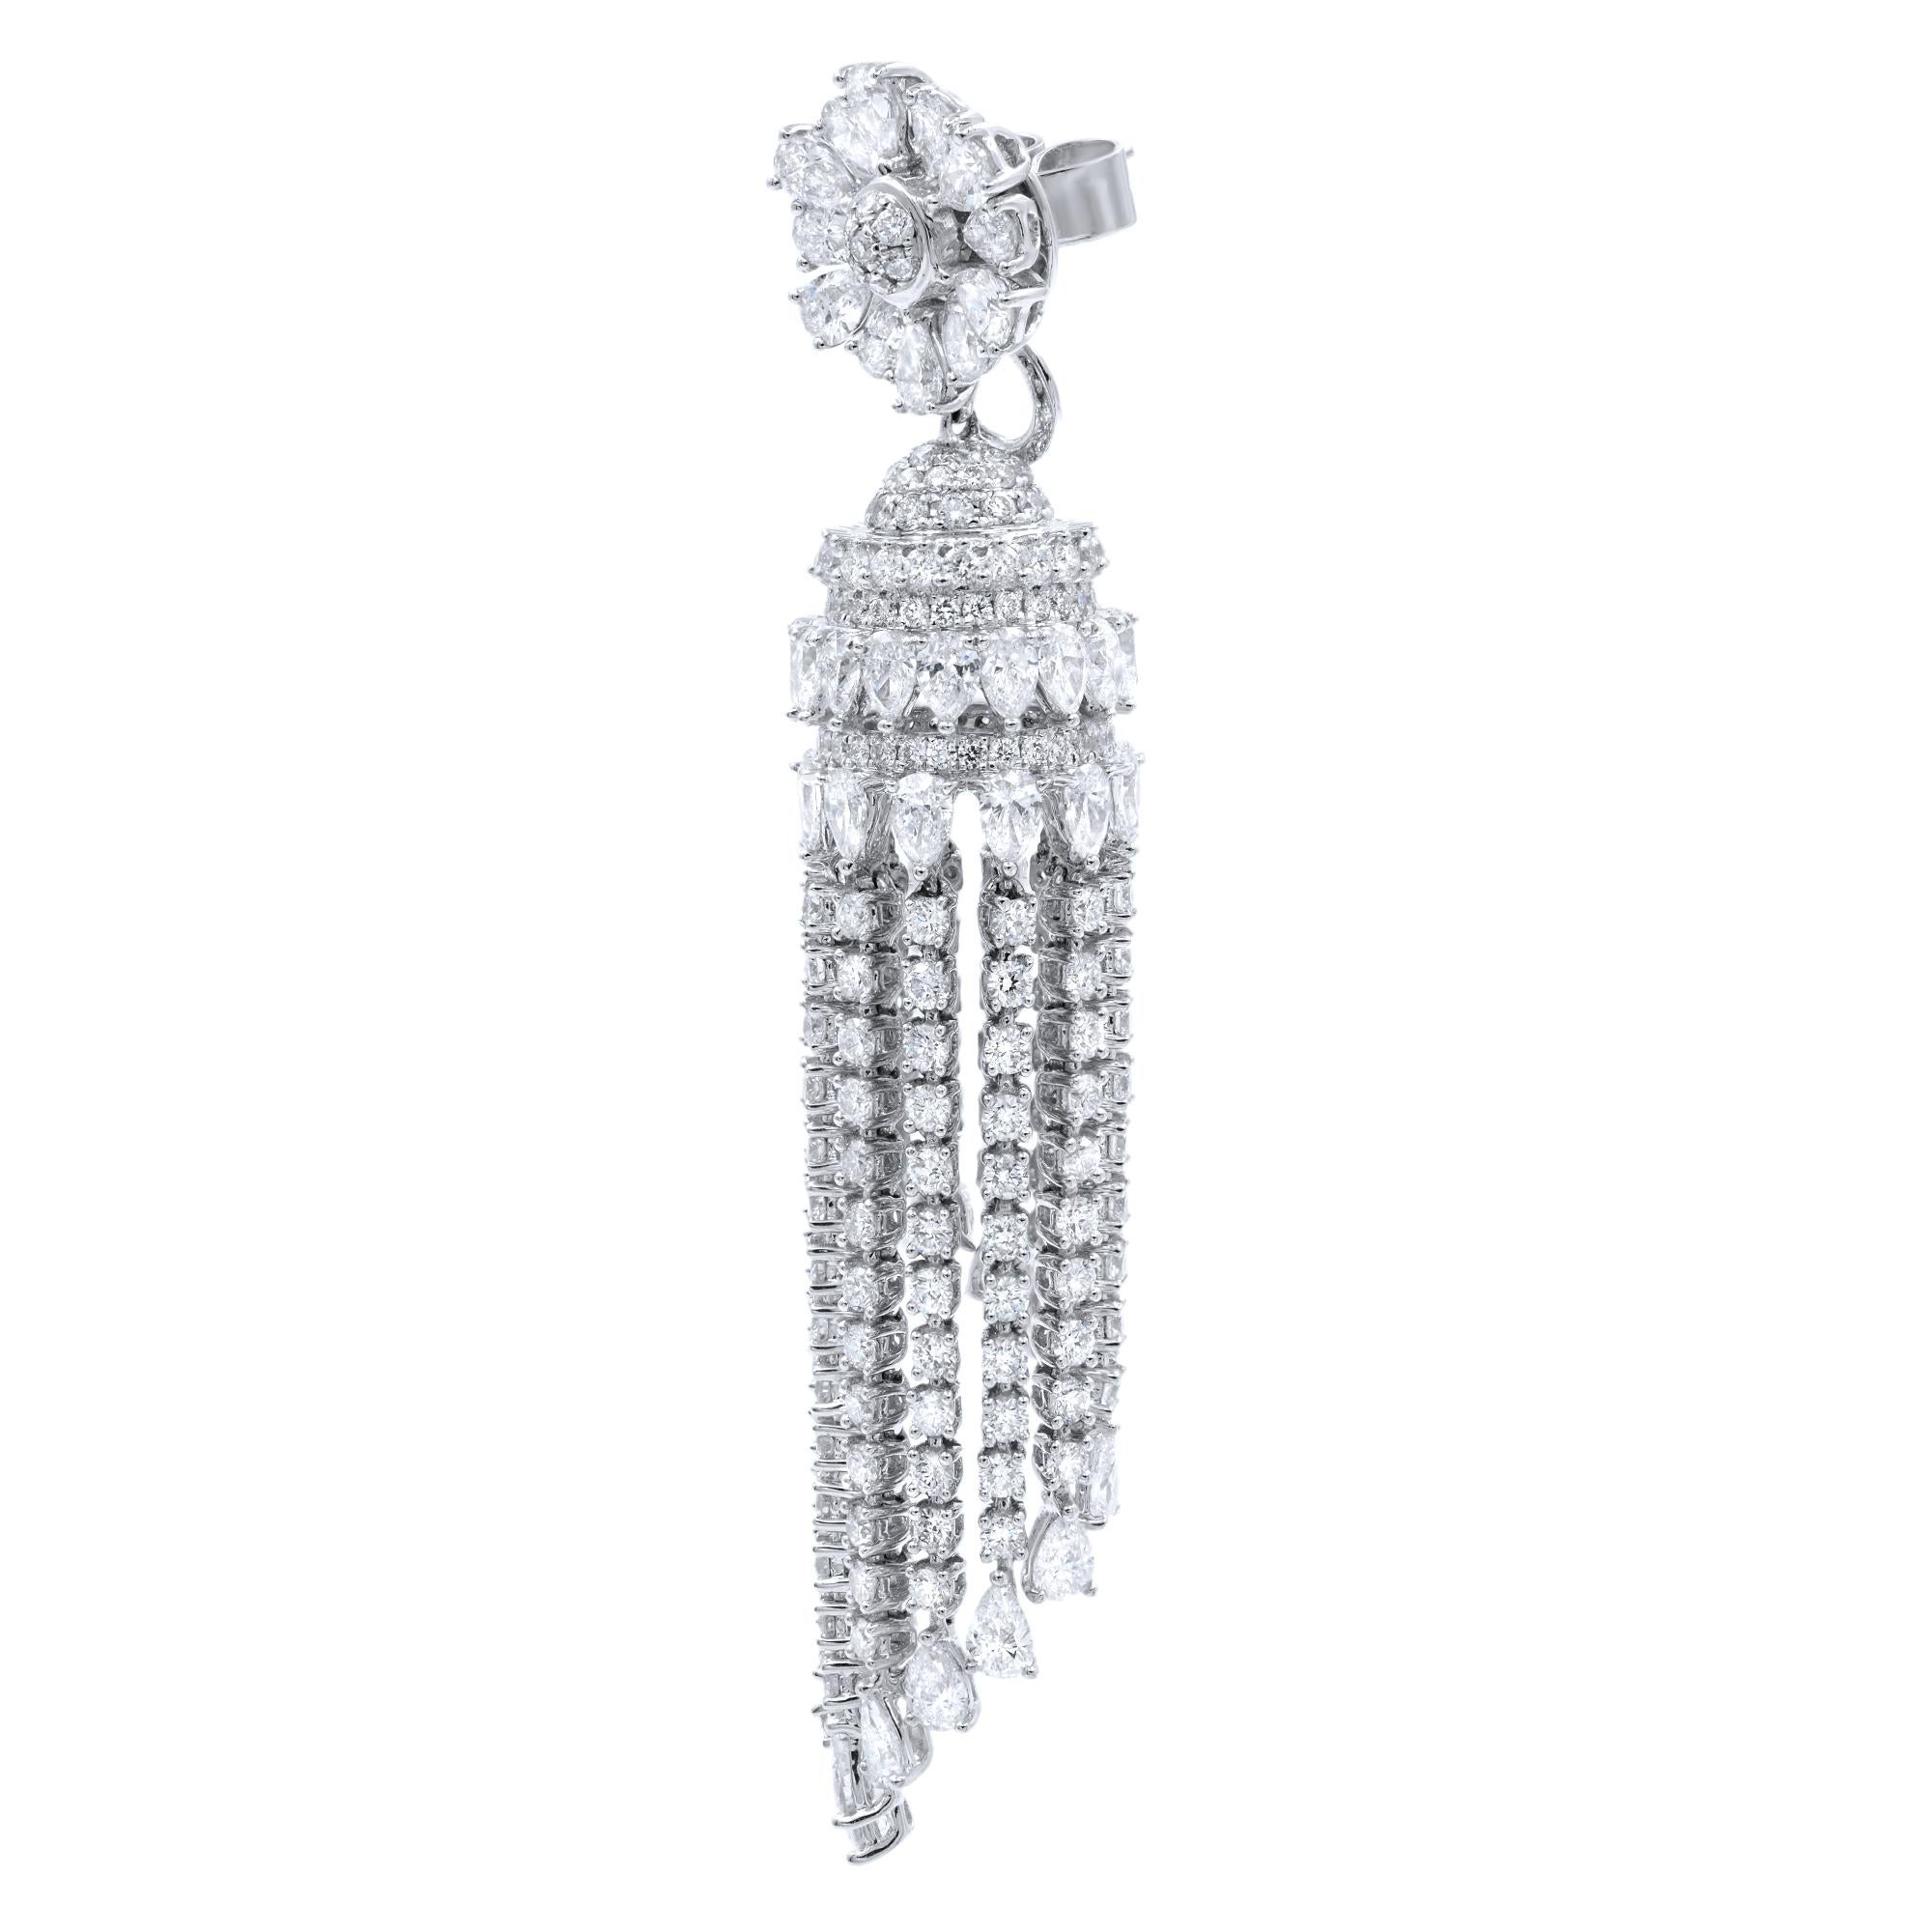 Ladies diamond drop earrings crafted in 18K White Gold. Beautiful diamond earrings are 2 inches long, make a statement outfit look complete. Make a grand entrance whenever you walk in the room wearing these fabulous absolutely stunning pair of